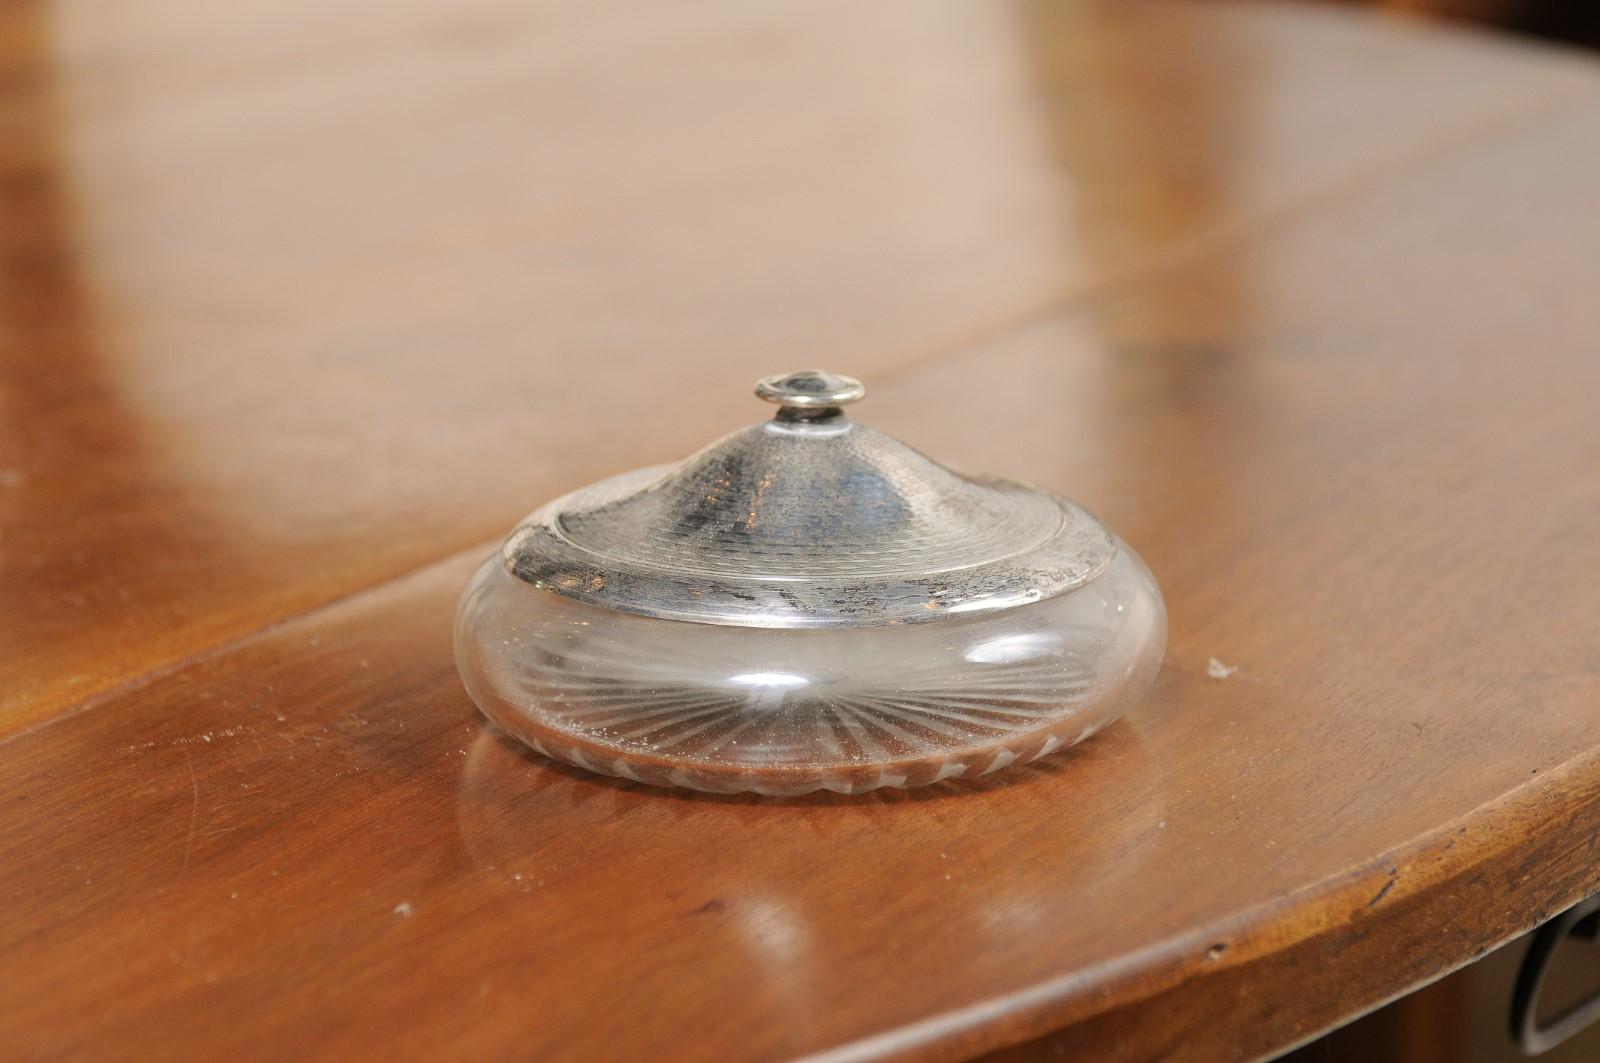 A small English Victorian period glass vanity jar from the 19th century, with silver lid and etched design. Created in England during the 19th century, this petite bottle features a circular glass body adorned with delicately etched radiating motifs